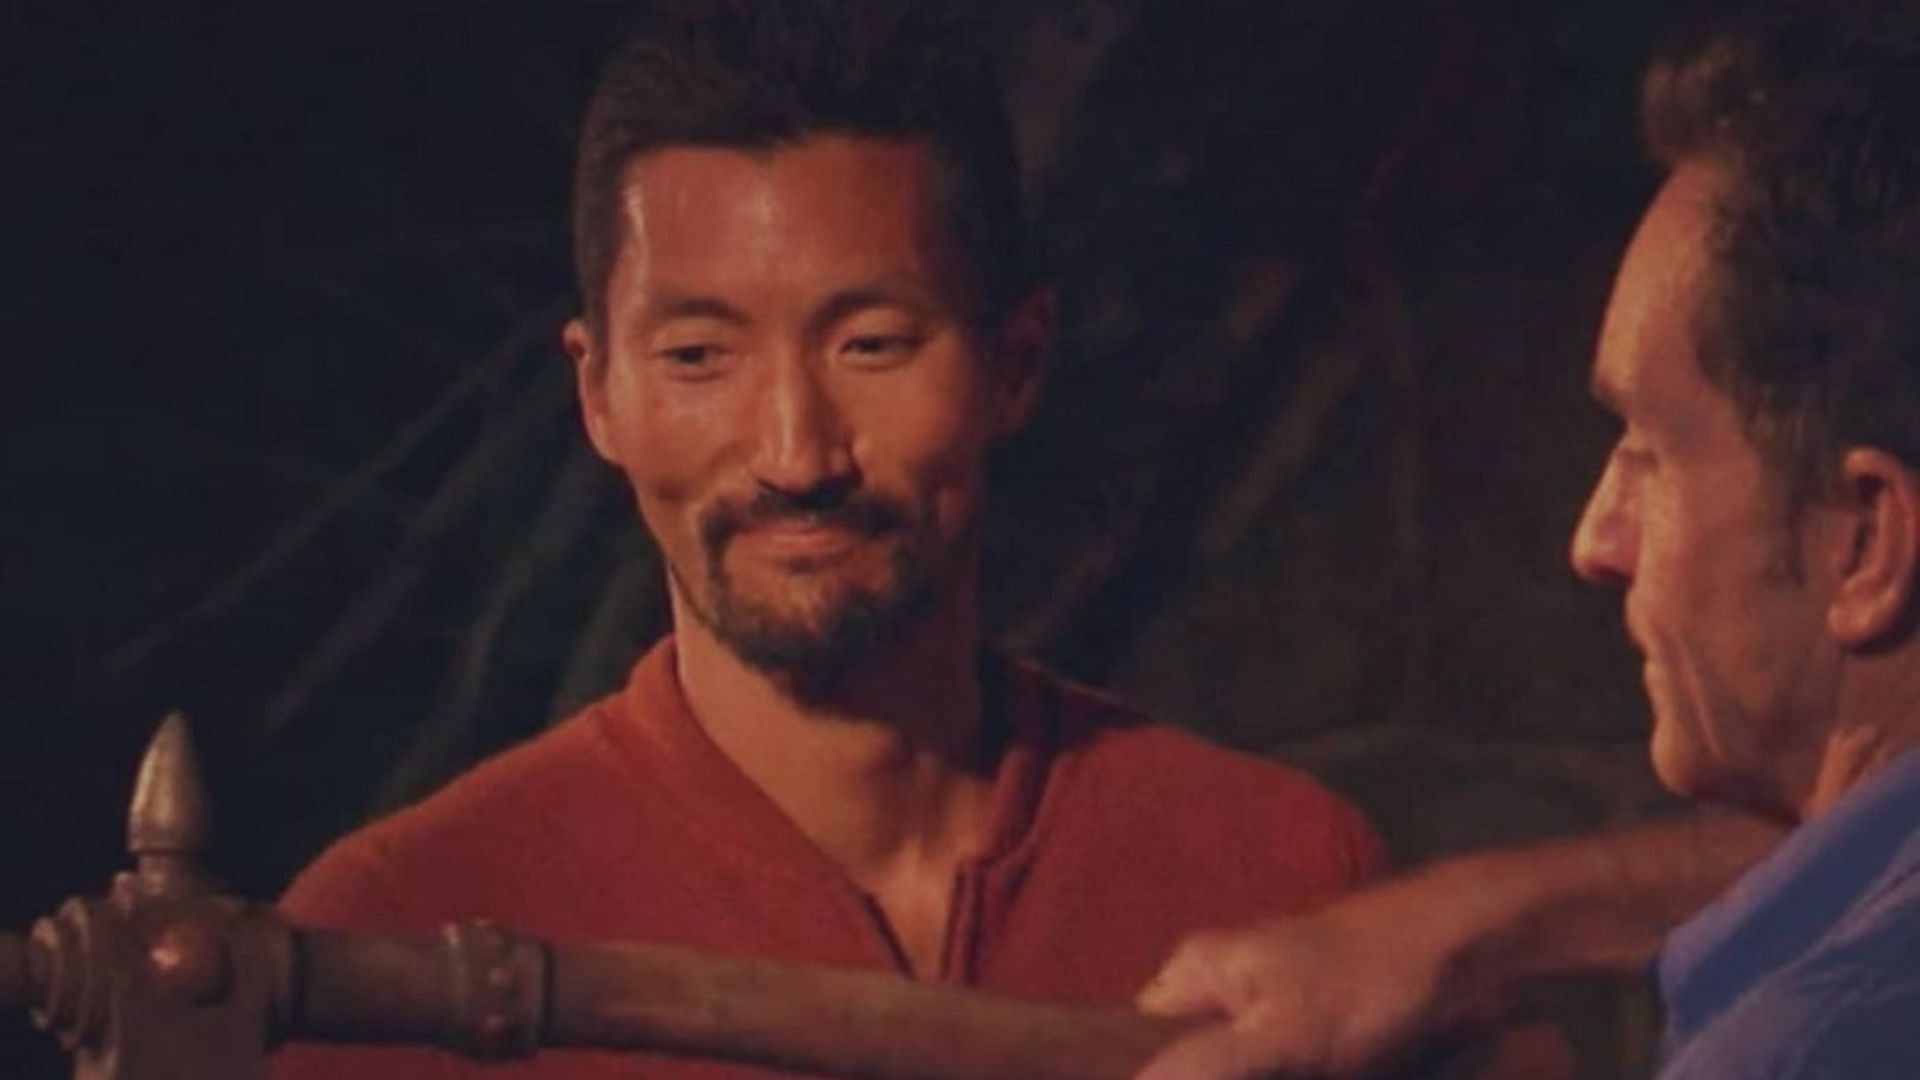 Former Survivor contestant Yul Kwon will appear in Snake in the Grass (Image via yulkwon/Instagram)